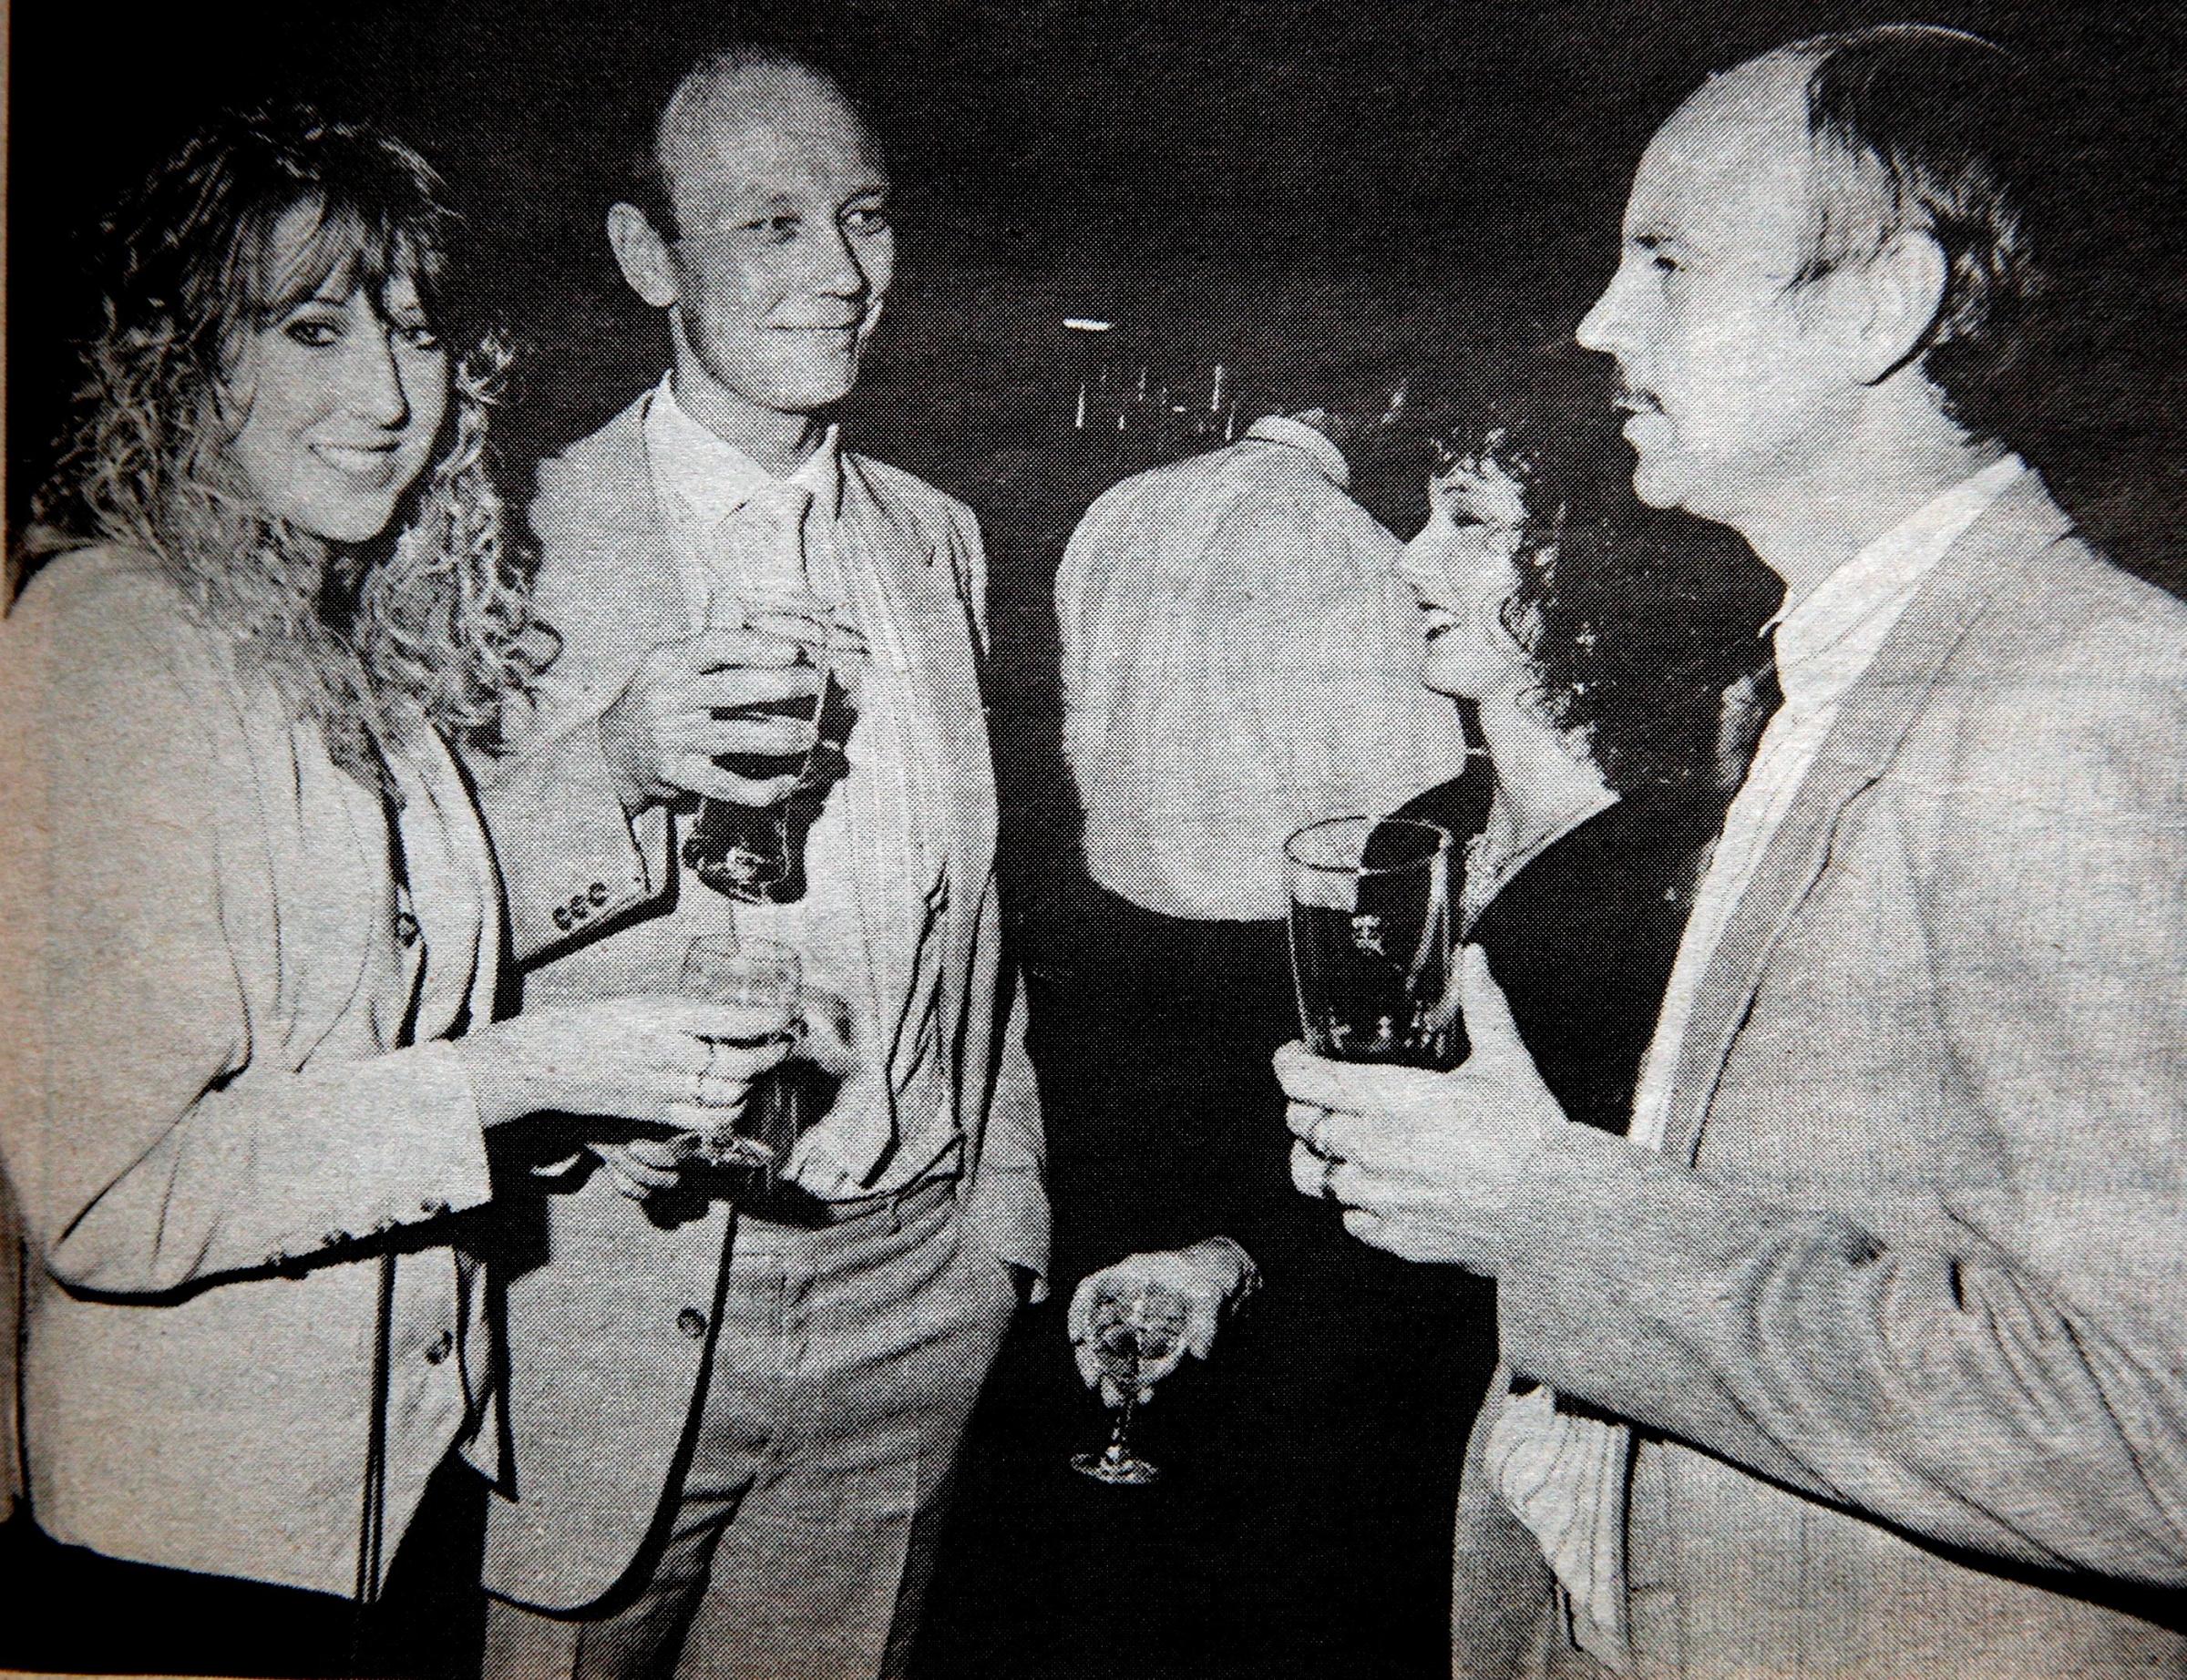 Opening of Scotts, October 1989 - Lisa Rayworth, Keith Shuttleworth and Mike Samson.